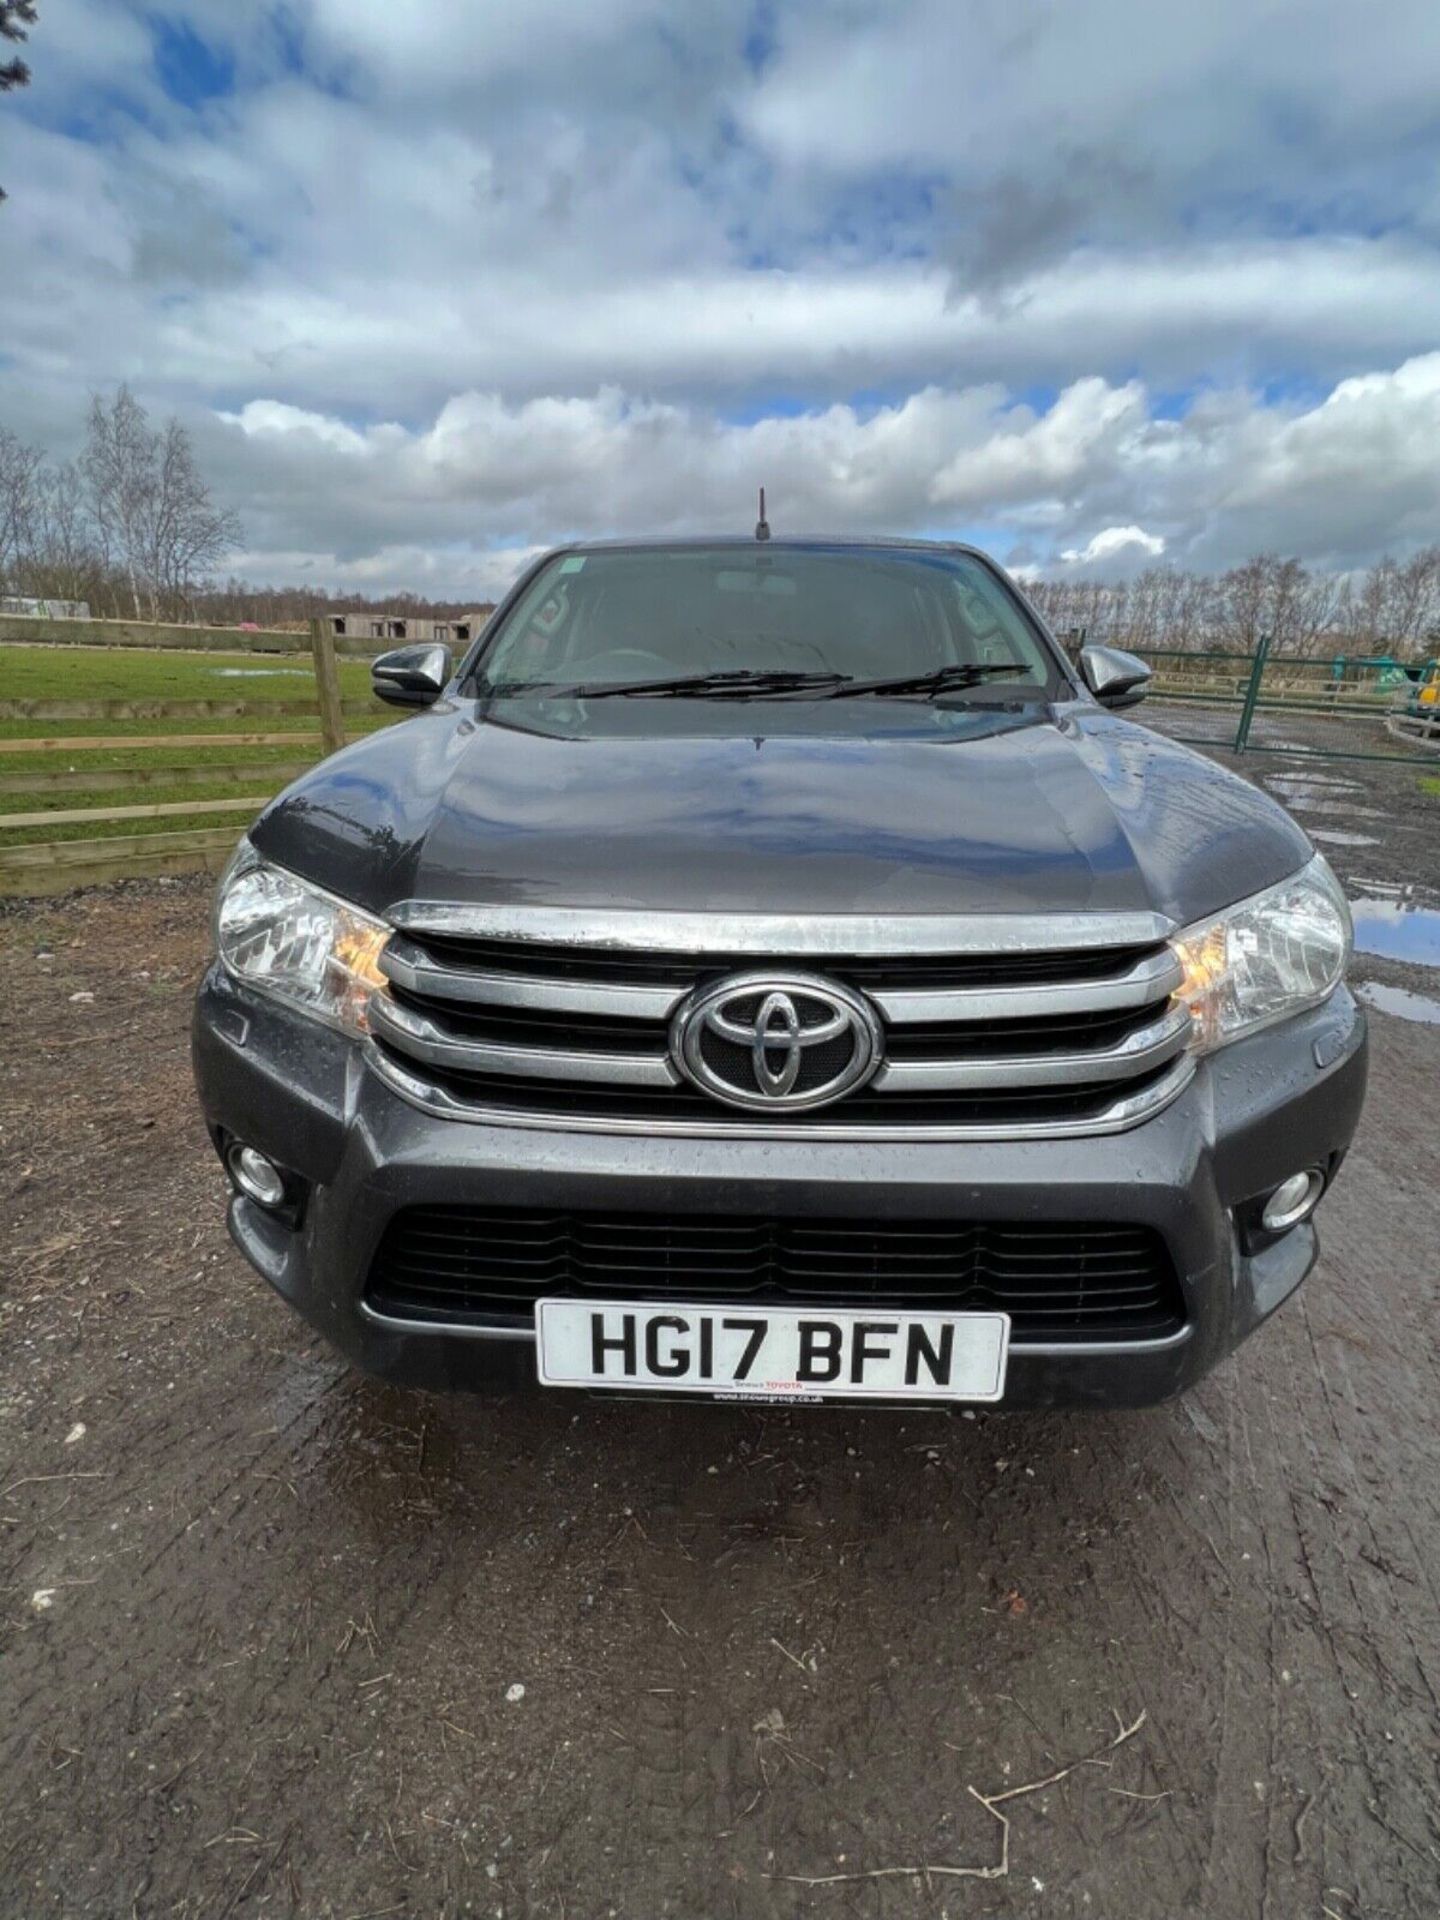 2017 TOYOTA HILUX D4D - 72K MILES FROM NEW - FULL SERVICE HISTORY - Image 11 of 15